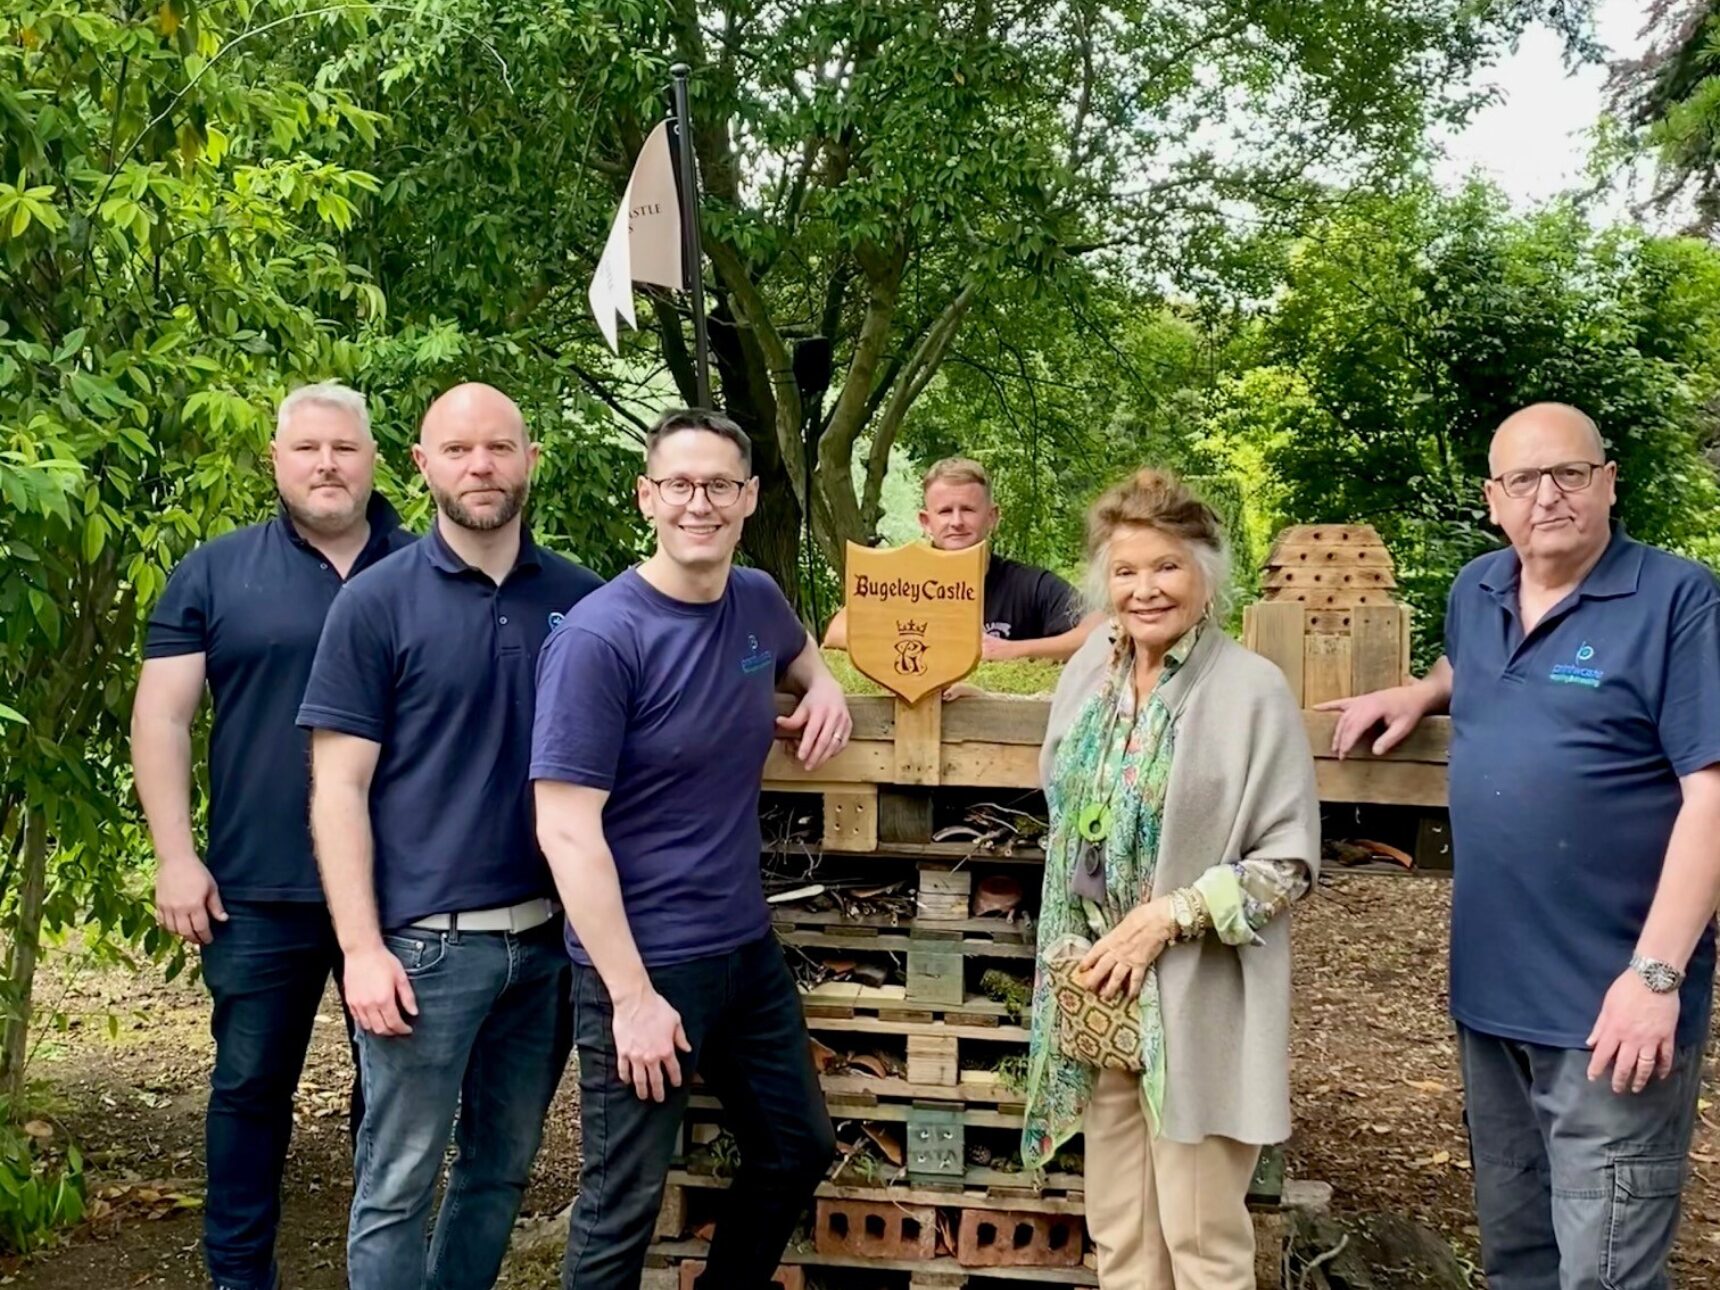 The brilliant team at Print Waste took time out to create 'Bugeley Castle', pictured here with Elizabeth, Lady Ashcombe